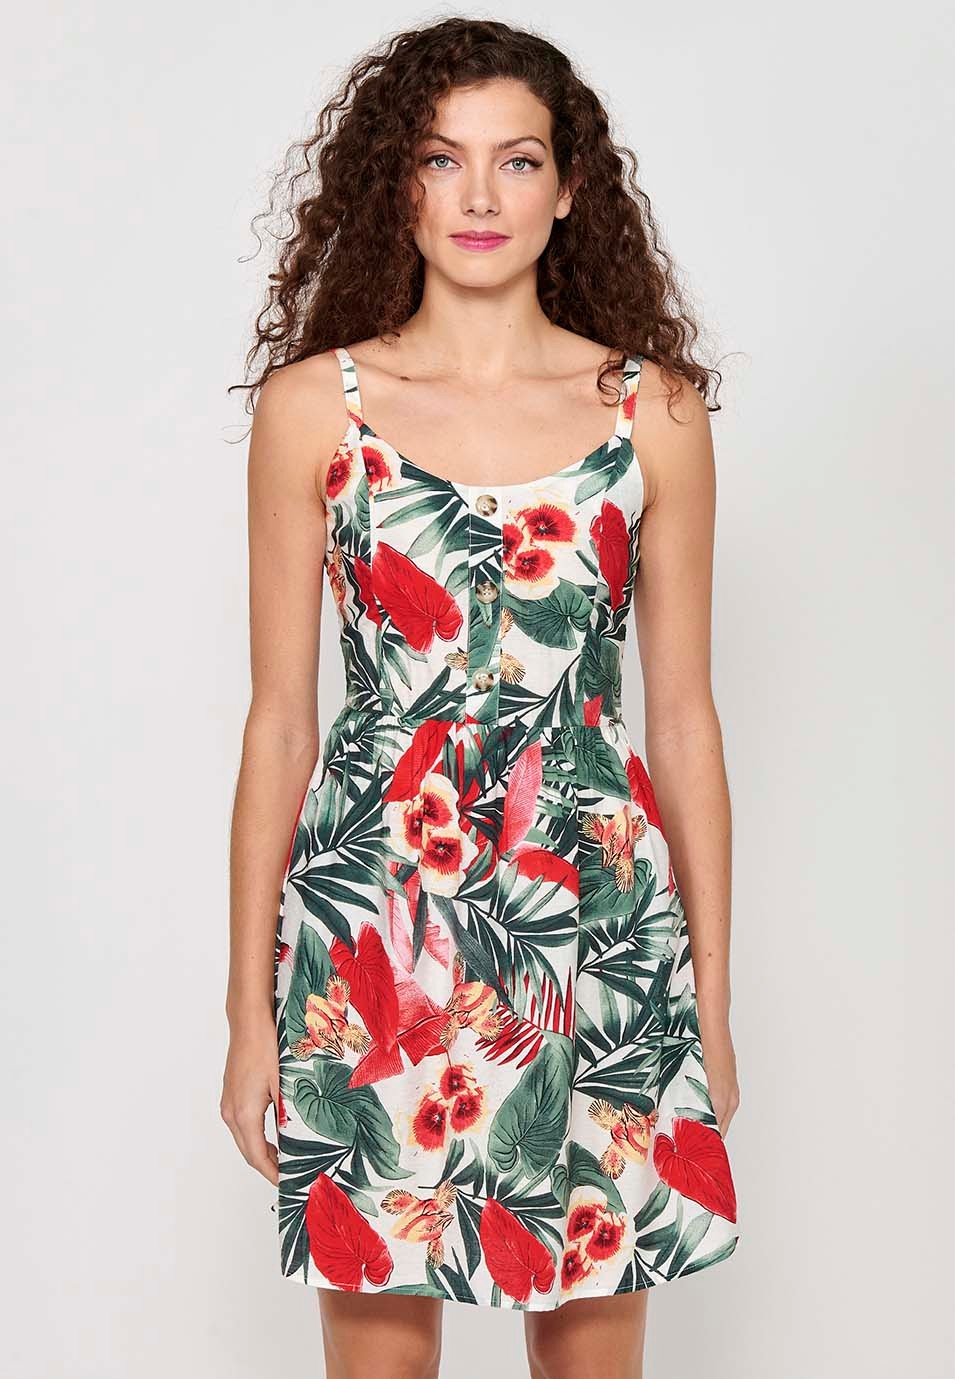 Women's Tropical Floral Print V-Neck Button Front Strap Dress with Rubberized Back Multicolor 7